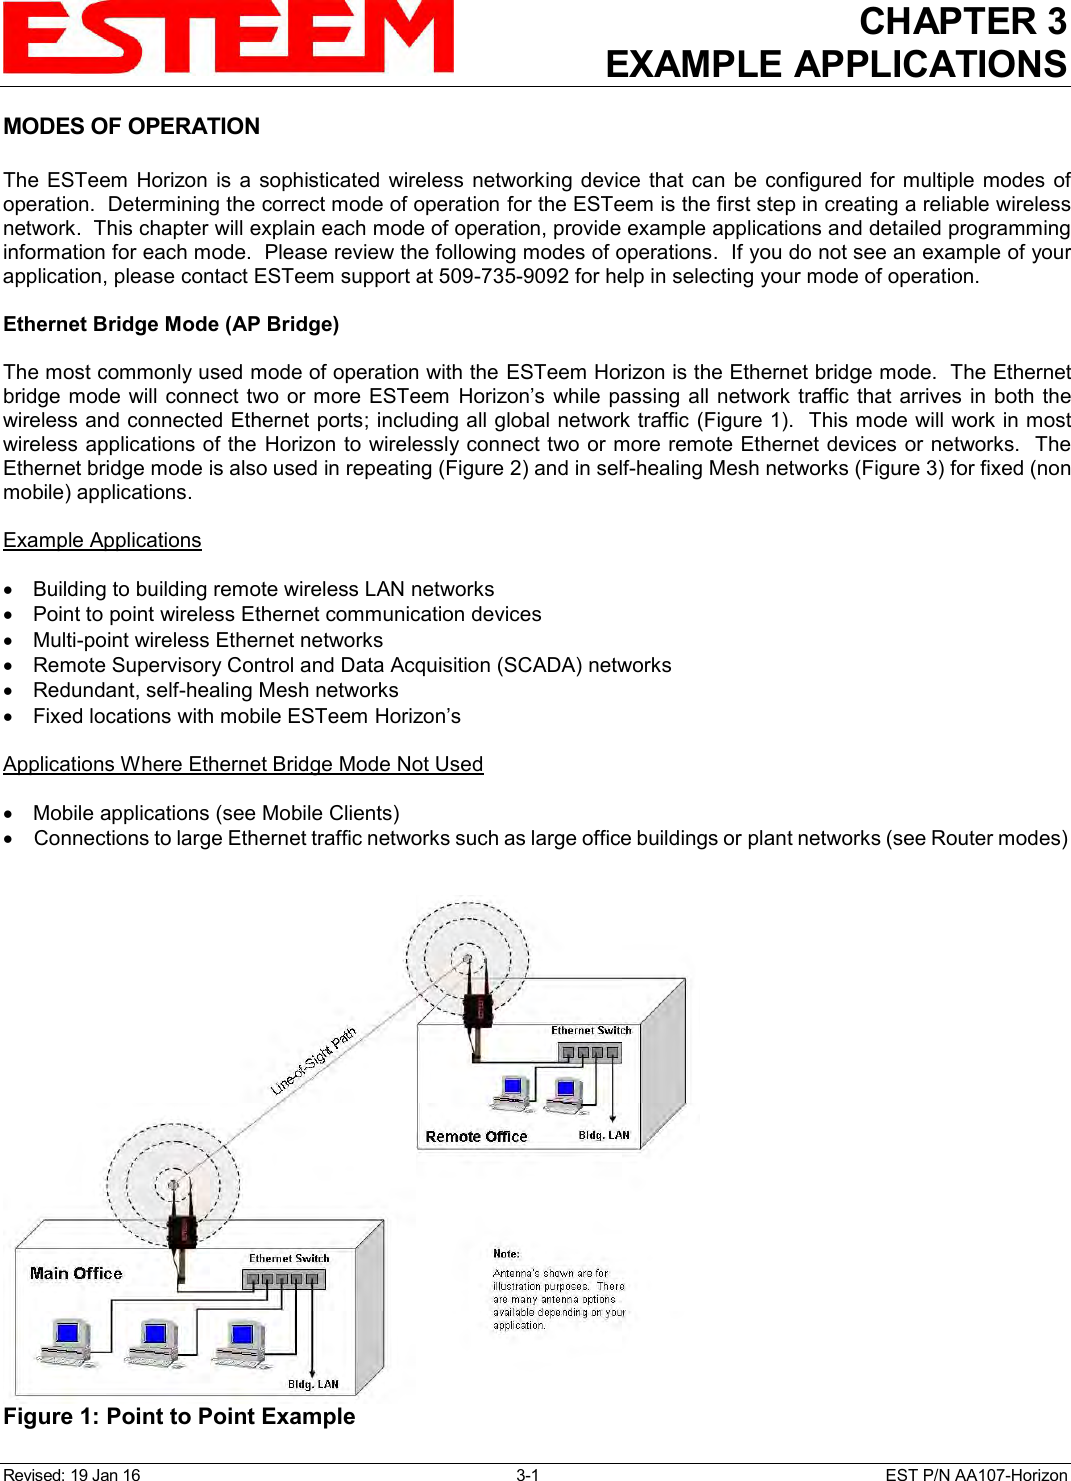 CHAPTER 3 EXAMPLE APPLICATIONS  Revised: 19 Jan 16  3-1  EST P/N AA107-Horizon MODES OF OPERATION  The  ESTeem  Horizon  is  a  sophisticated  wireless  networking  device  that  can  be  configured for  multiple  modes  of operation.  Determining the correct mode of operation for the ESTeem is the first step in creating a reliable wireless network.  This chapter will explain each mode of operation, provide example applications and detailed programming information for each mode.  Please review the following modes of operations.  If you do not see an example of your application, please contact ESTeem support at 509-735-9092 for help in selecting your mode of operation.  Ethernet Bridge Mode (AP Bridge)  The most commonly used mode of operation with the ESTeem Horizon is the Ethernet bridge mode.  The Ethernet bridge mode will connect  two or more ESTeem  Horizon’s while  passing all network  traffic that arrives in both  the wireless and connected Ethernet ports; including all global network traffic (Figure 1).  This mode will work in most wireless applications of the  Horizon to wirelessly connect two or more remote Ethernet devices or networks.  The Ethernet bridge mode is also used in repeating (Figure 2) and in self-healing Mesh networks (Figure 3) for fixed (non mobile) applications.  Example Applications    Building to building remote wireless LAN networks   Point to point wireless Ethernet communication devices   Multi-point wireless Ethernet networks   Remote Supervisory Control and Data Acquisition (SCADA) networks   Redundant, self-healing Mesh networks   Fixed locations with mobile ESTeem Horizon’s  Applications Where Ethernet Bridge Mode Not Used    Mobile applications (see Mobile Clients)   Connections to large Ethernet traffic networks such as large office buildings or plant networks (see Router modes)   Figure 1: Point to Point Example  